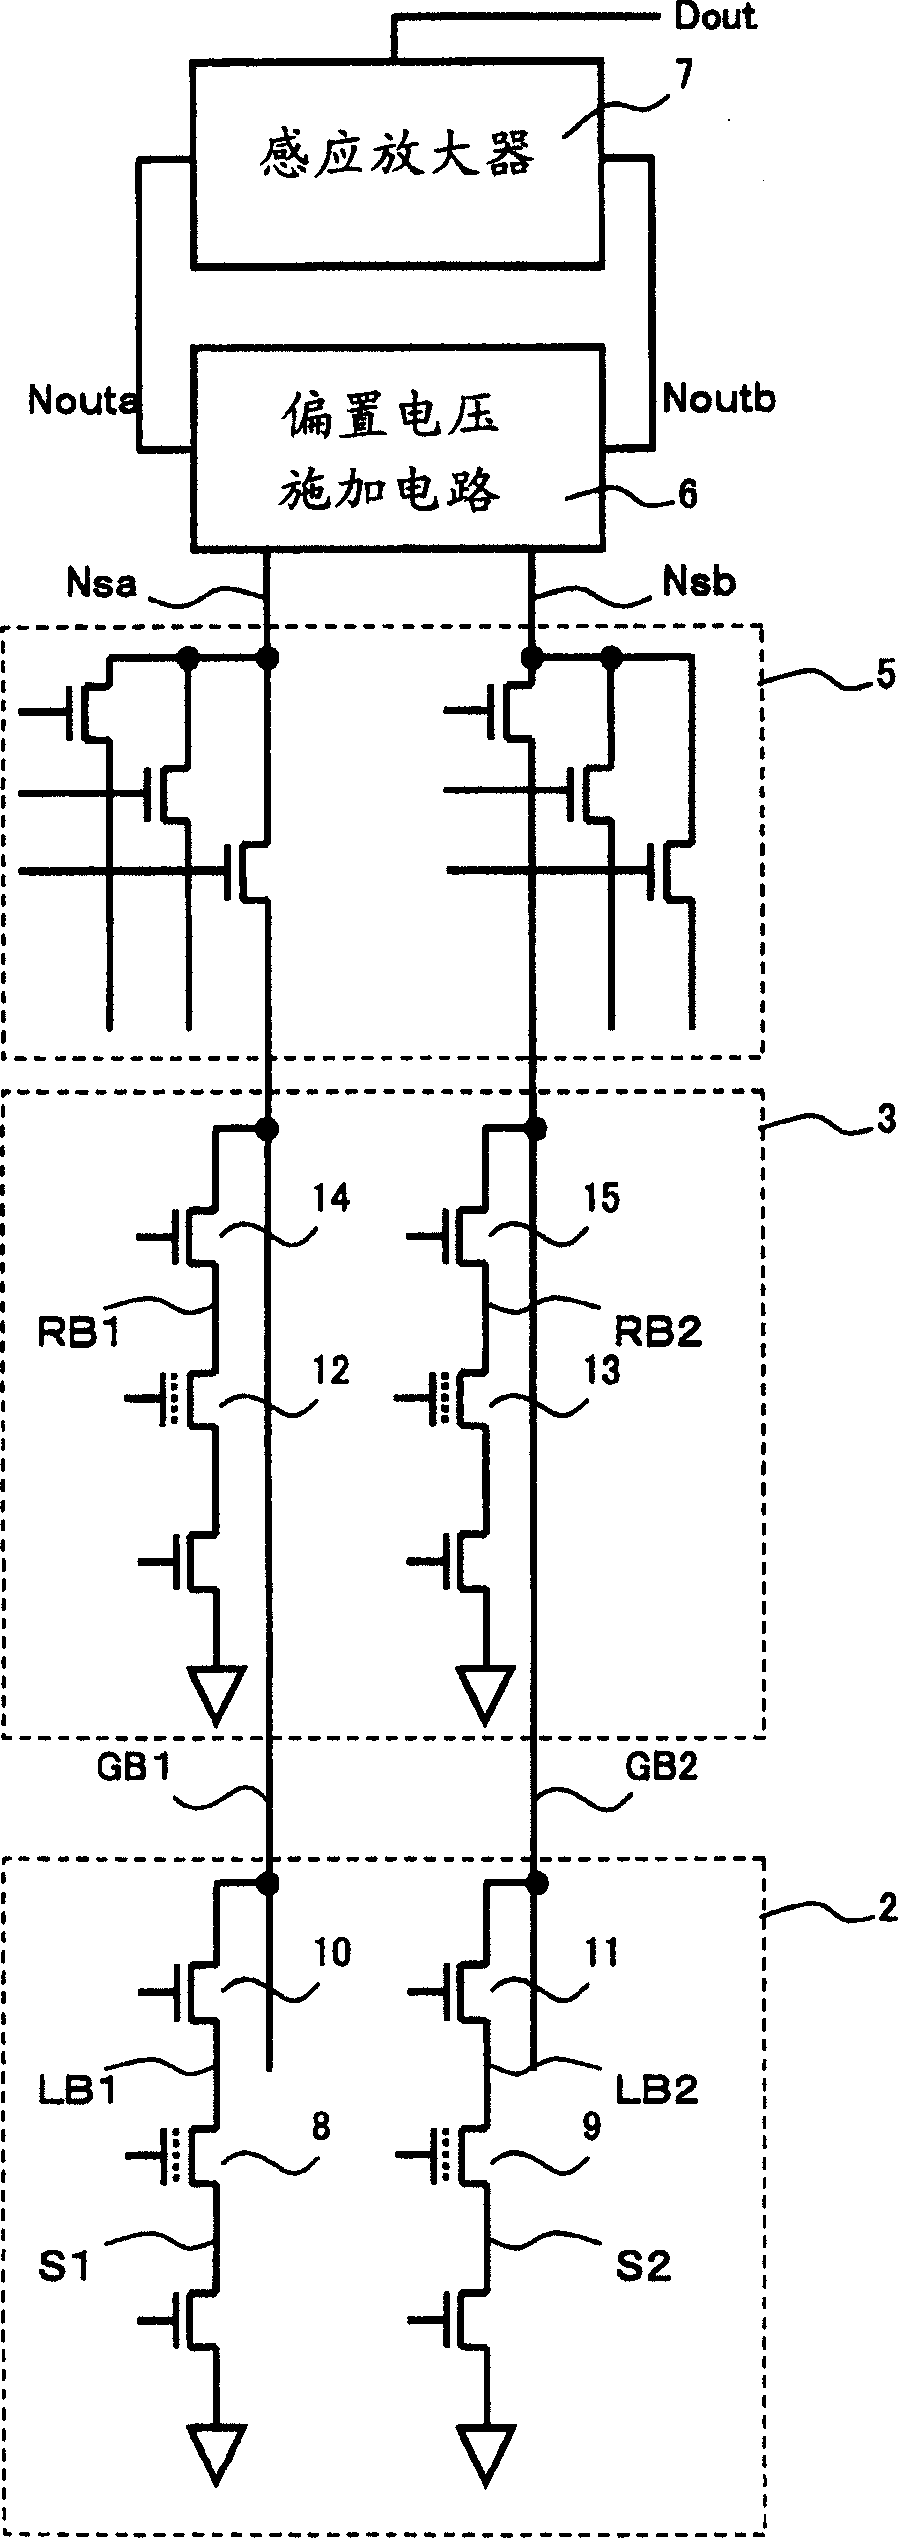 Bias voltage applying circuit and semiconductor memory device